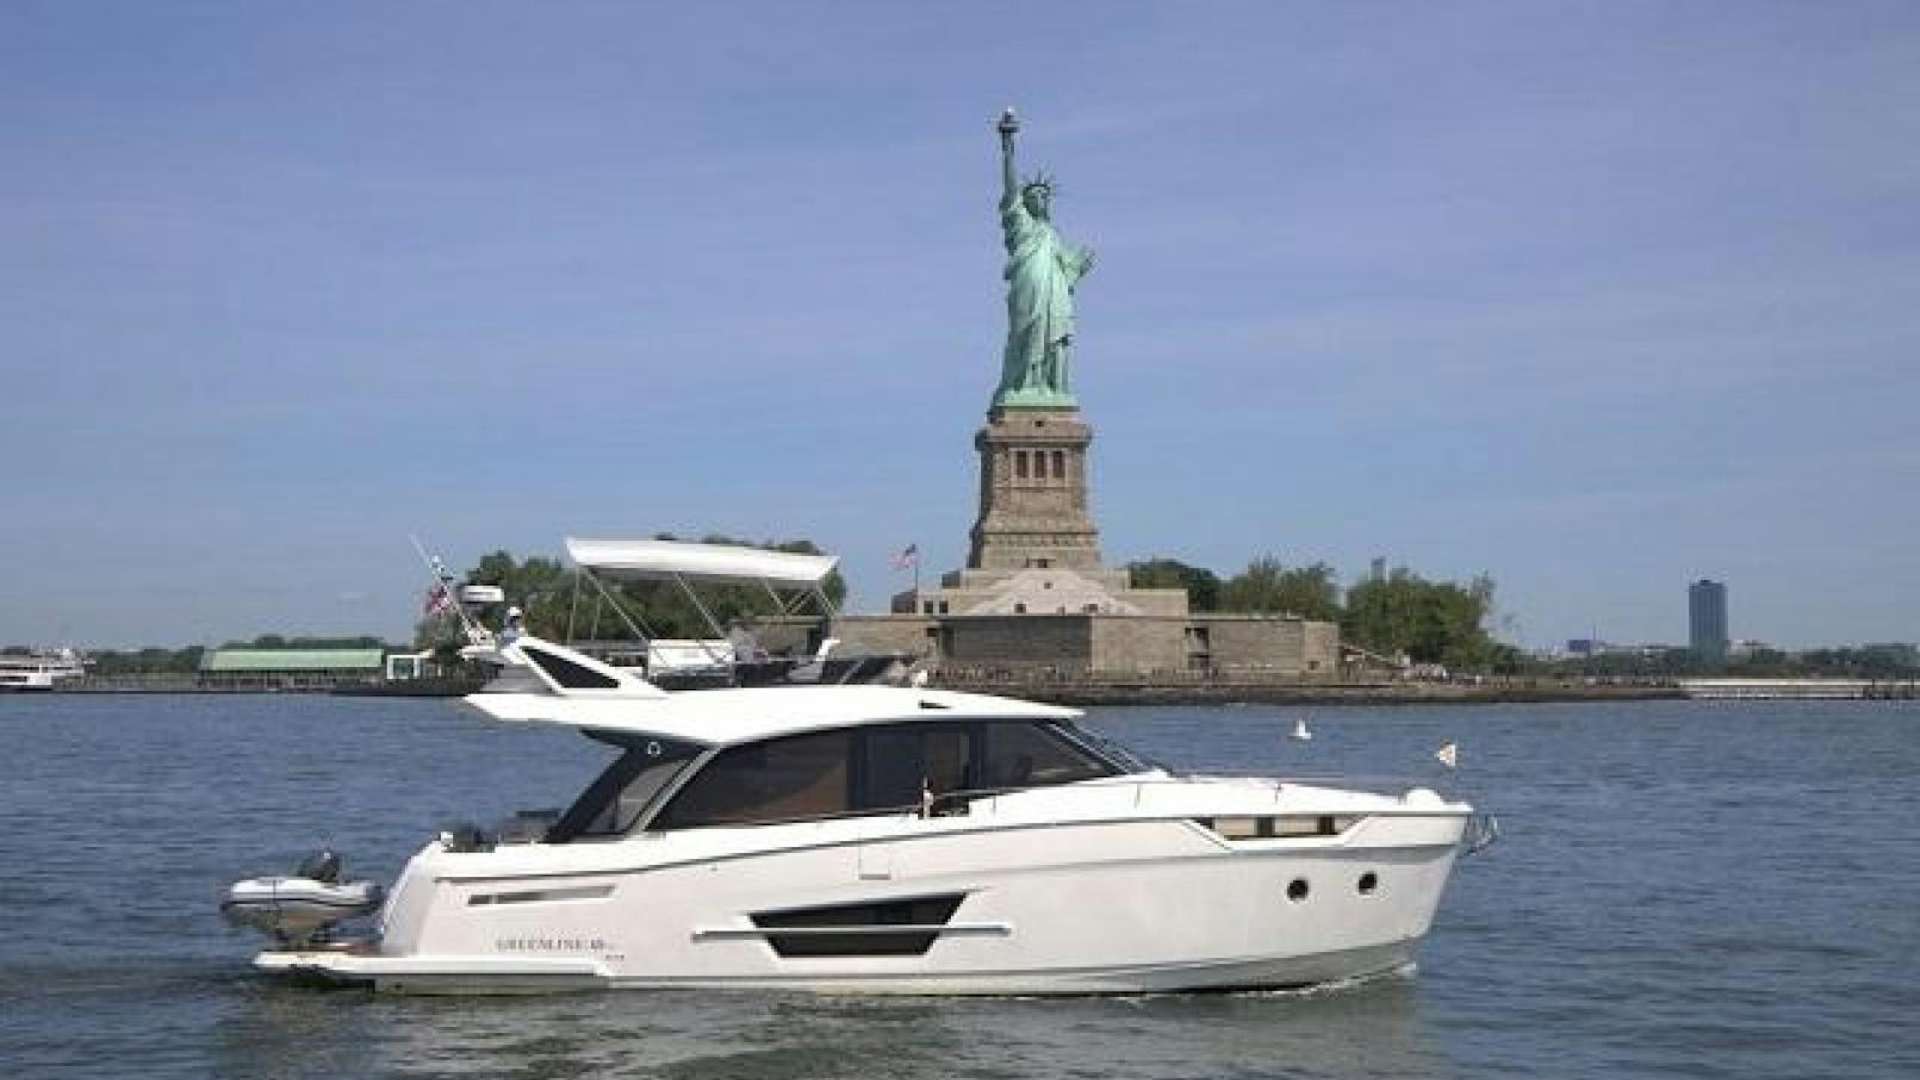 Off leash
Yacht for Sale